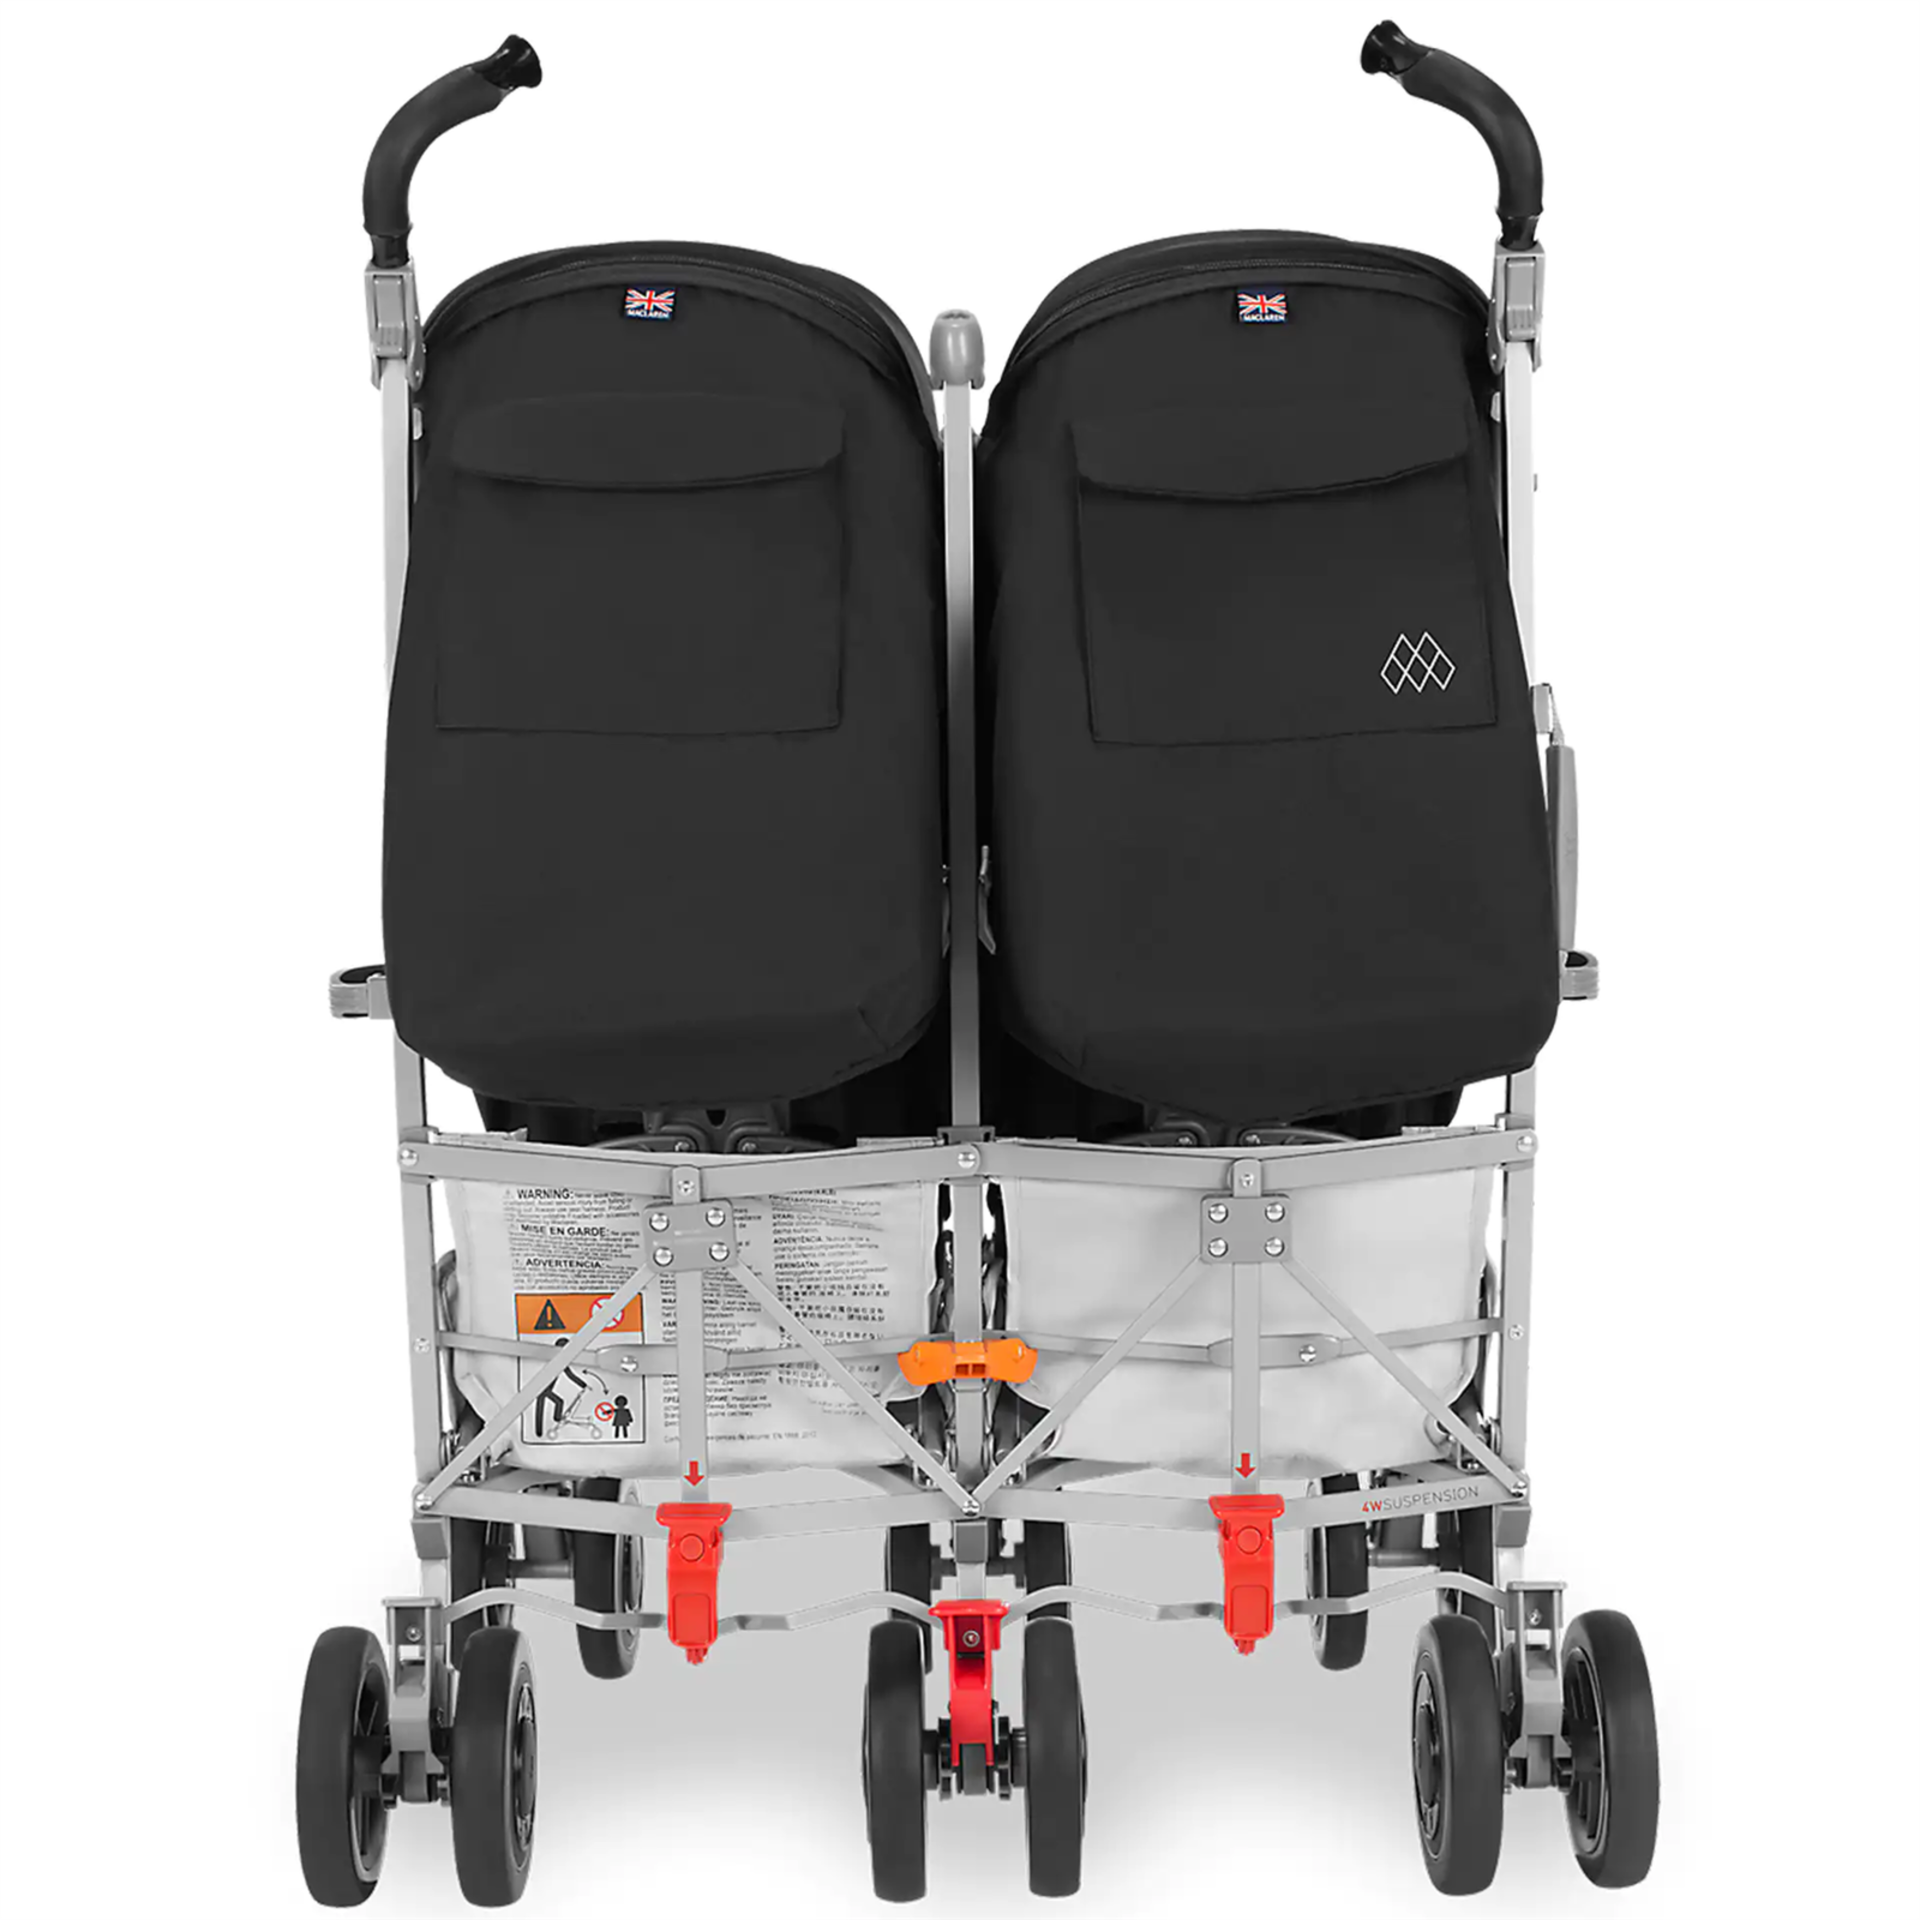 Maclaren Pushchair Twin Techno Black Built For Comfort/Performance For 2 Rrp £450 - Image 6 of 7